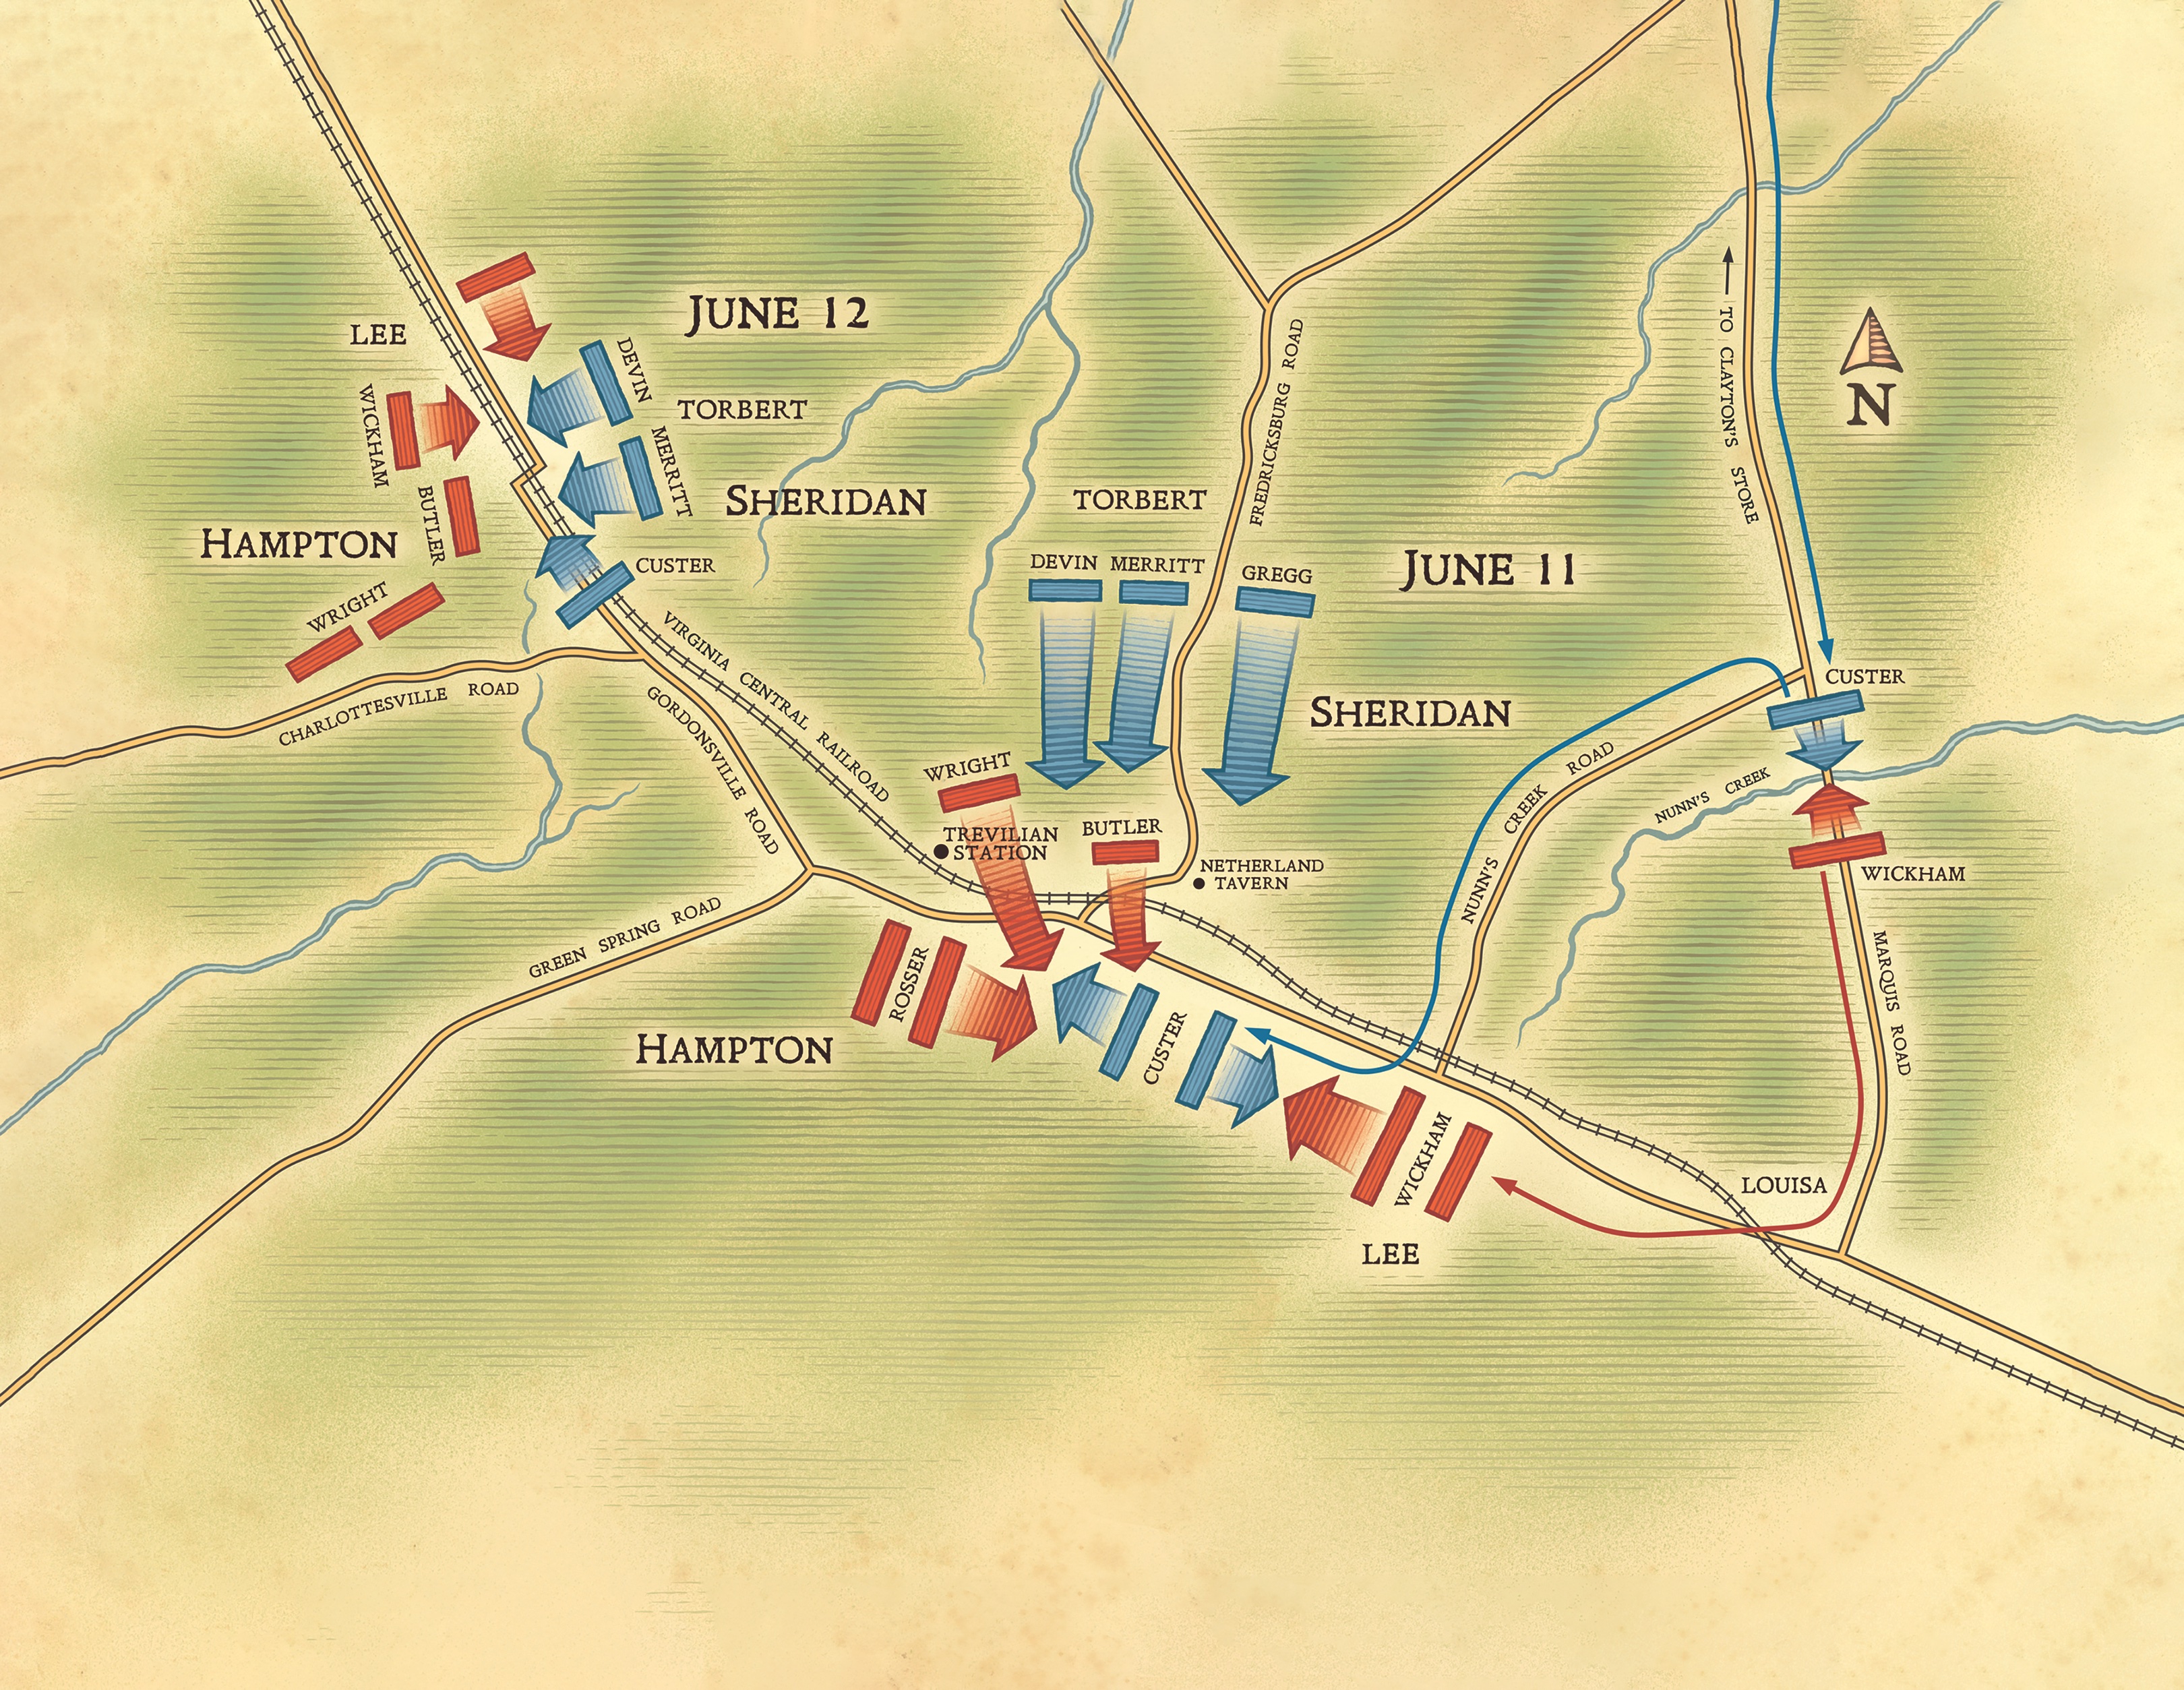 On June 8, 1864, ordered by Lieutenant General Ulysses S. Grant to destroy sections of the Virginia Central Railroad, Major General Philip Sheridan and his Union cavalry headed to Trevilian Station, Virginia. But Confederate cavalry under Major General Wade Hampton III beat Sheridan’s forces to the punch, and on June 11 the two sides fought to a standstill. The next day the two sides met again northwest of Trevilian Station, where both suffered heavy casualties as they fought into the night. In the end, Sheridan had little choice but to withdraw. (Map by Erwin Sherman)